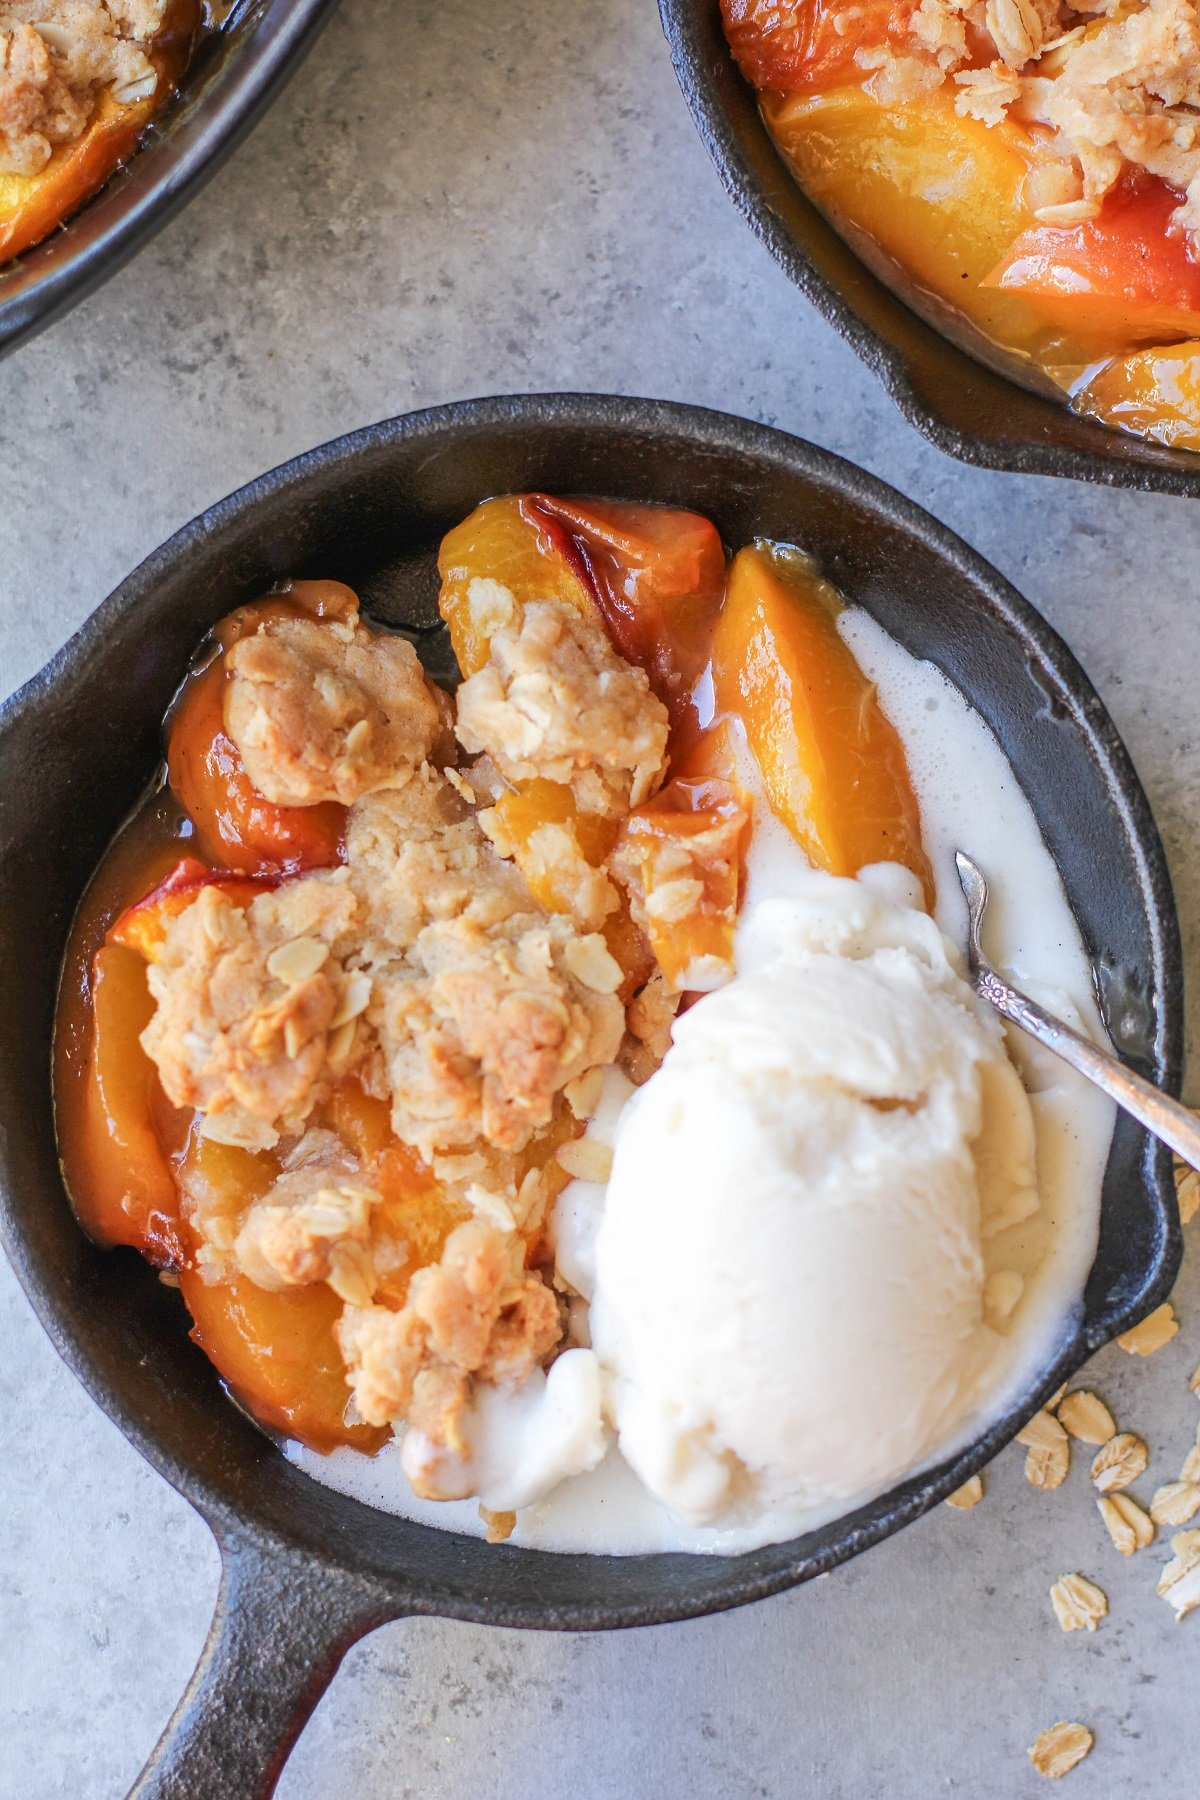 Close up of a single serve of peach cobbler in a small skillet with a melted scoop of vanilla ice cream.